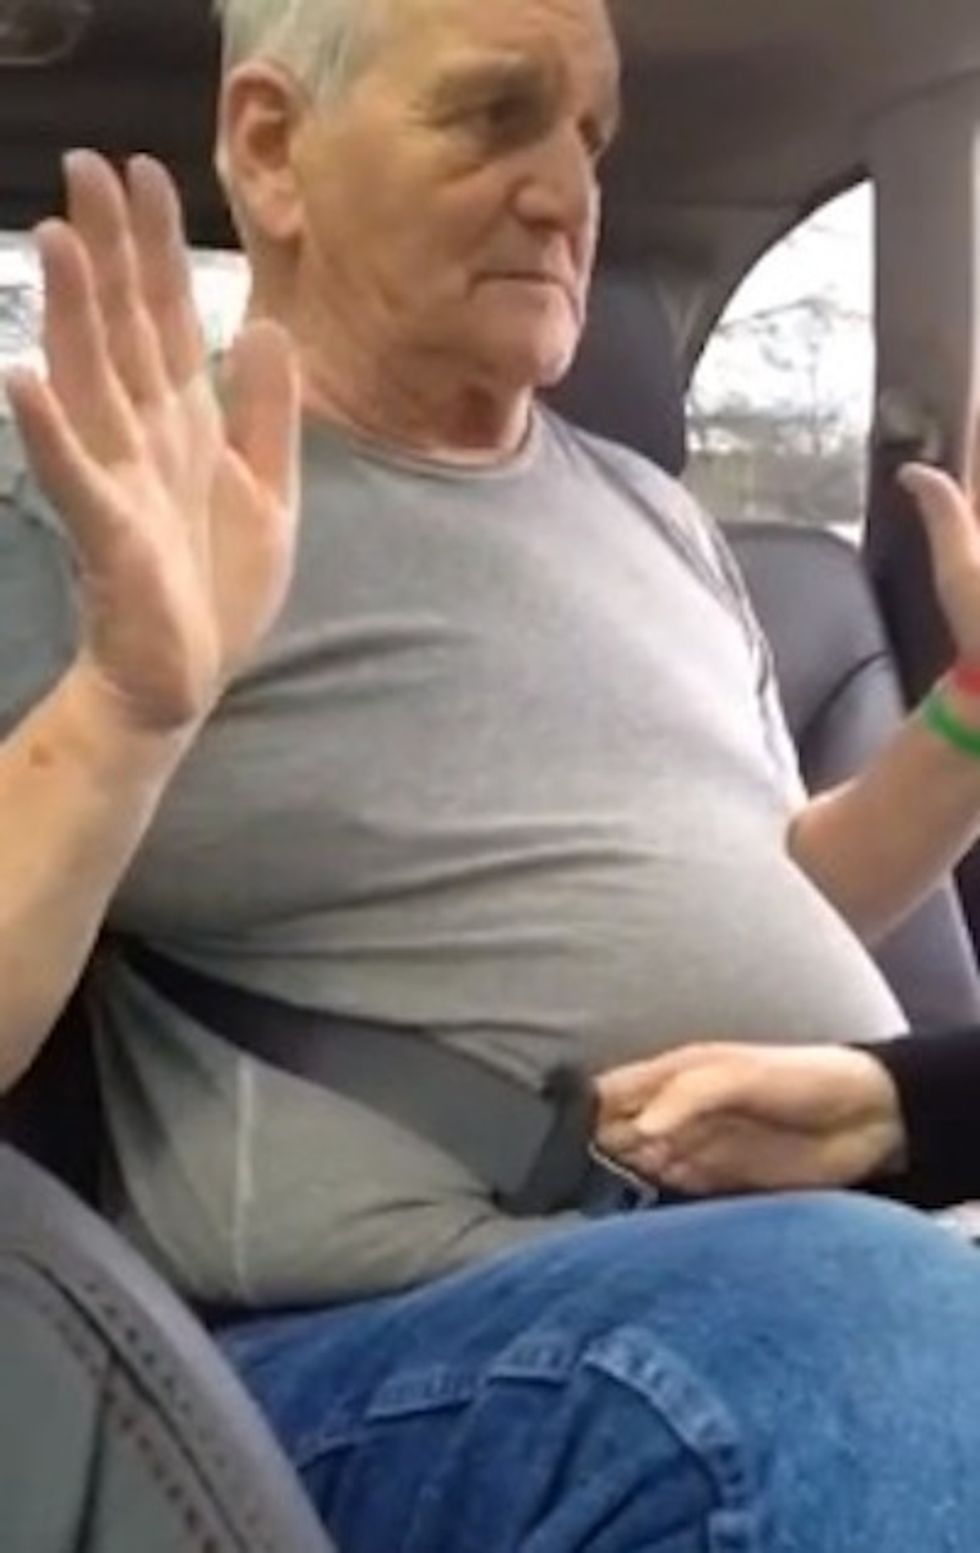 Video of a 71-Year-Old Man Stuck in a Seat Belt That We Guarantee Will Have You Cracking Up